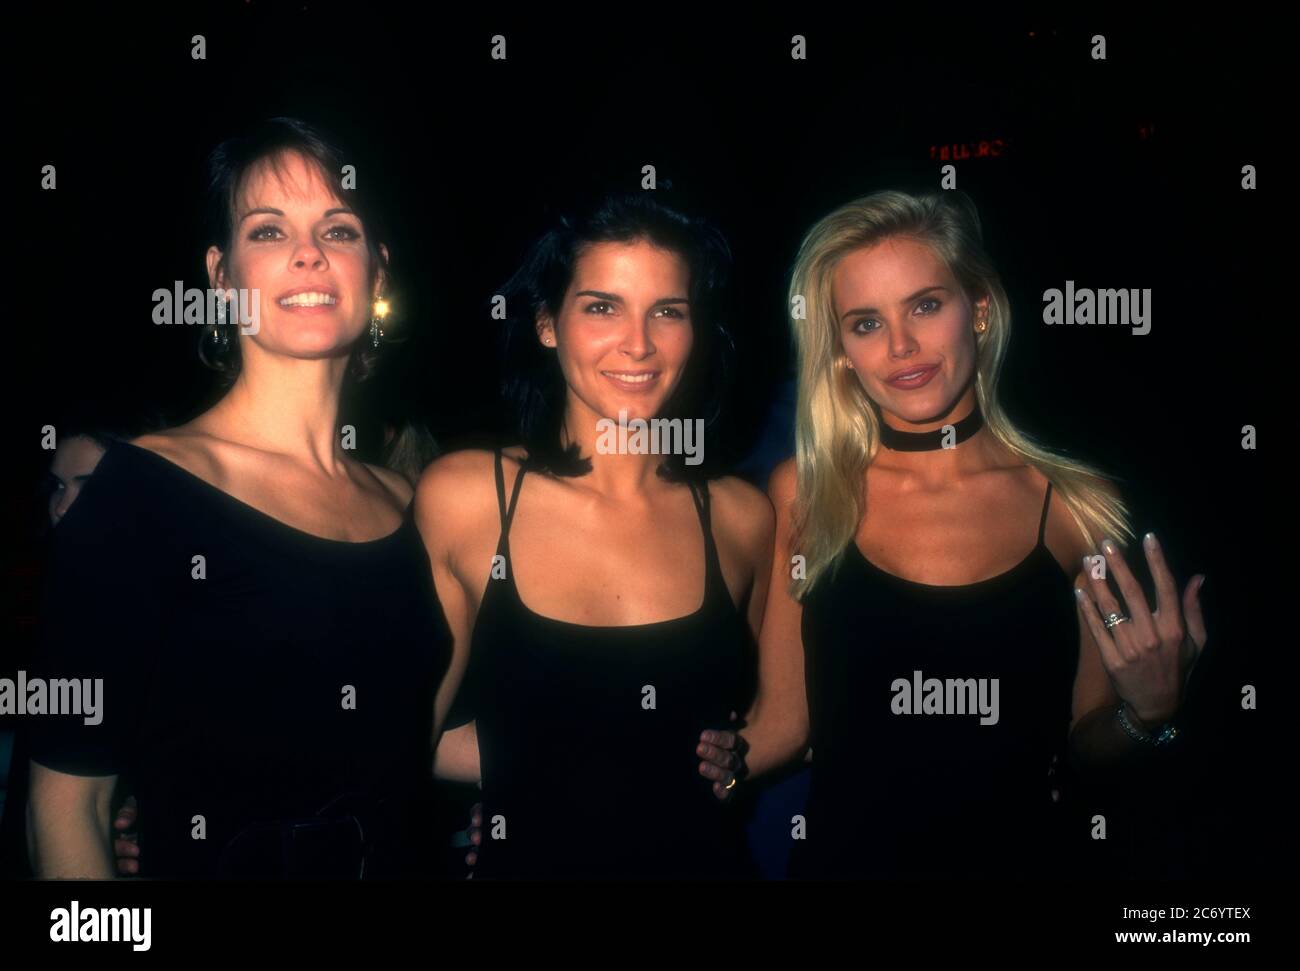 Universal City, California, USA 15th December 1995 (L-R) Actresses Alexandra Paul, Angie Harmon and Gena Lee Nolan attend Baywatch & Baywatch Nights Holiday Party on December 15, 1995 at B.B. King's Blues Club in Universal City, California, USA. Photo by Barry King/Alamy Stock Photo Stock Photo